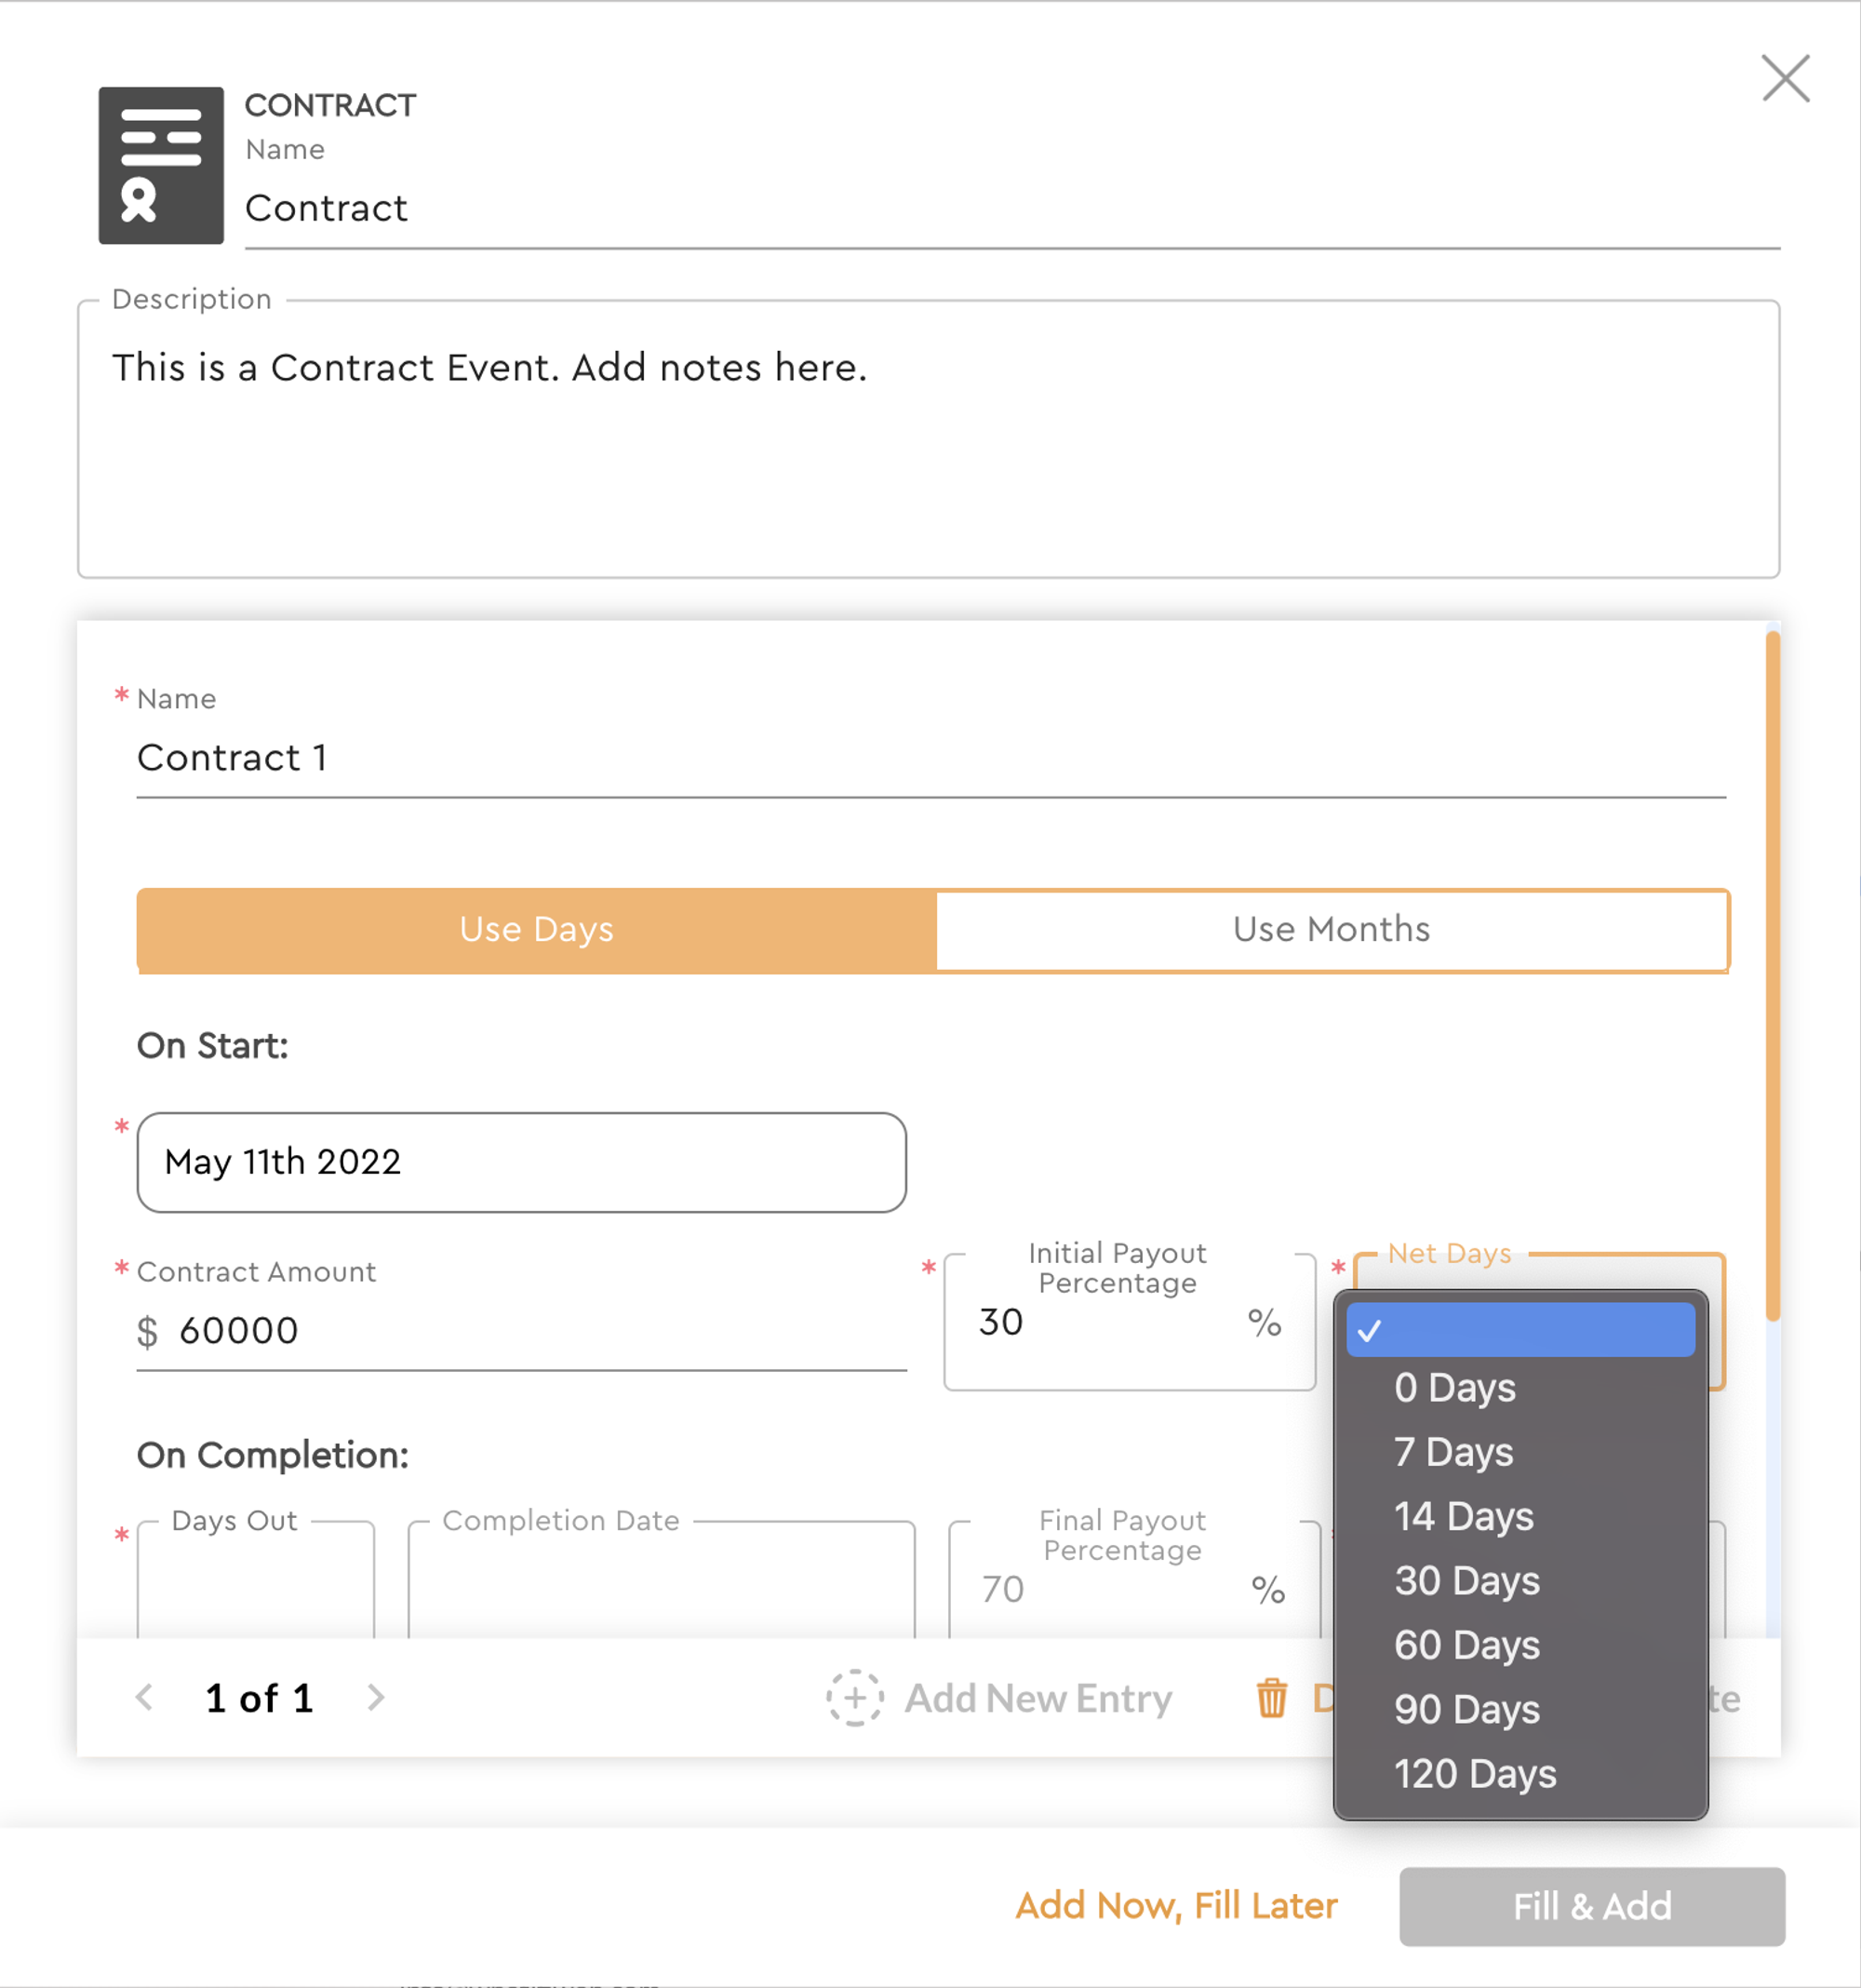 An example of an Edit Details Panel for the Contract Event.